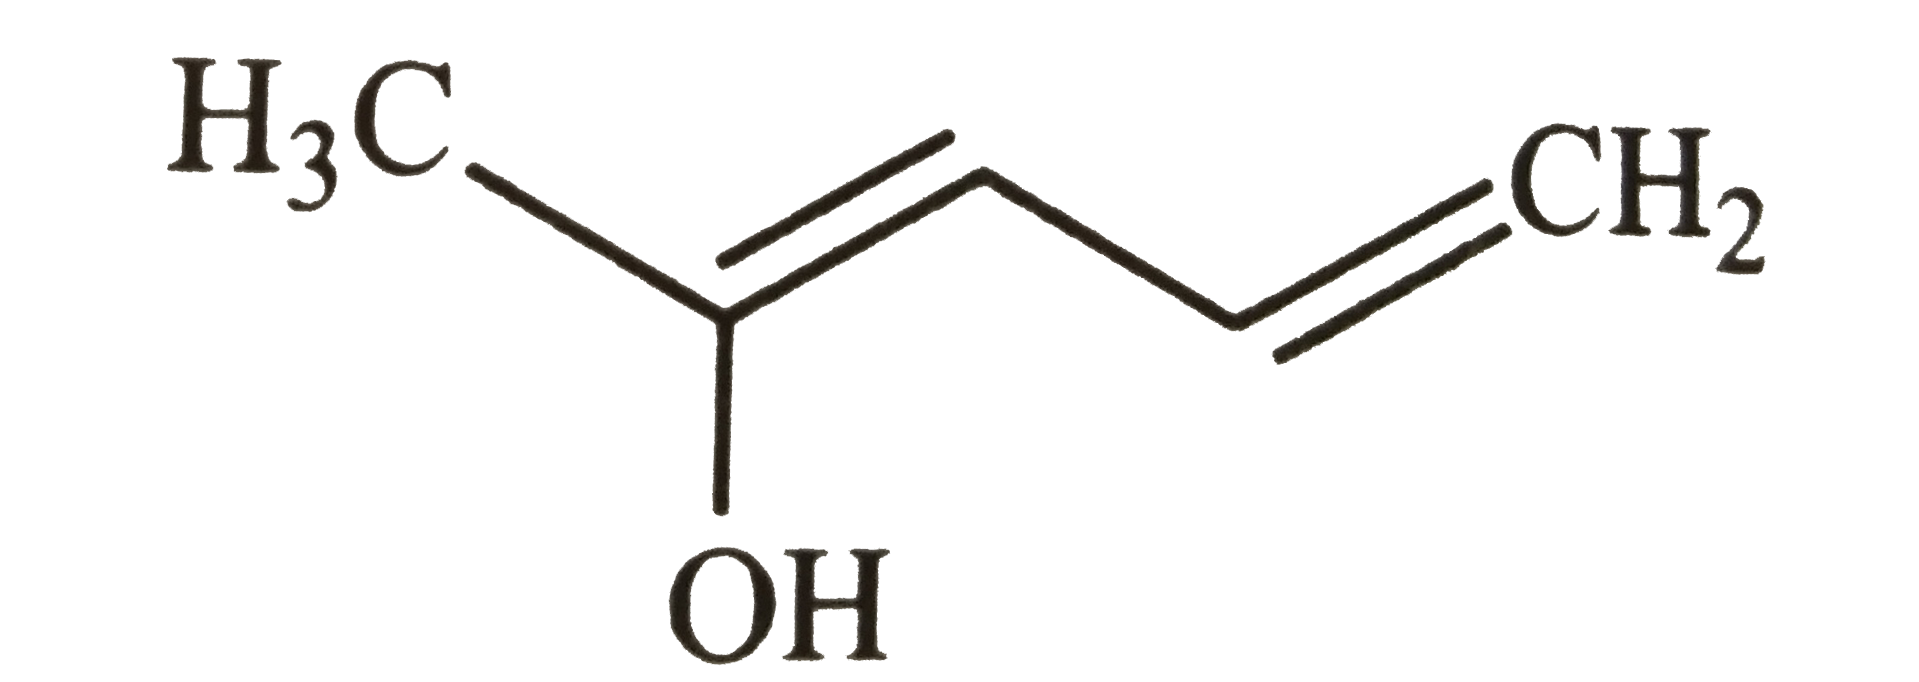 Write resonance structures of the given compound.